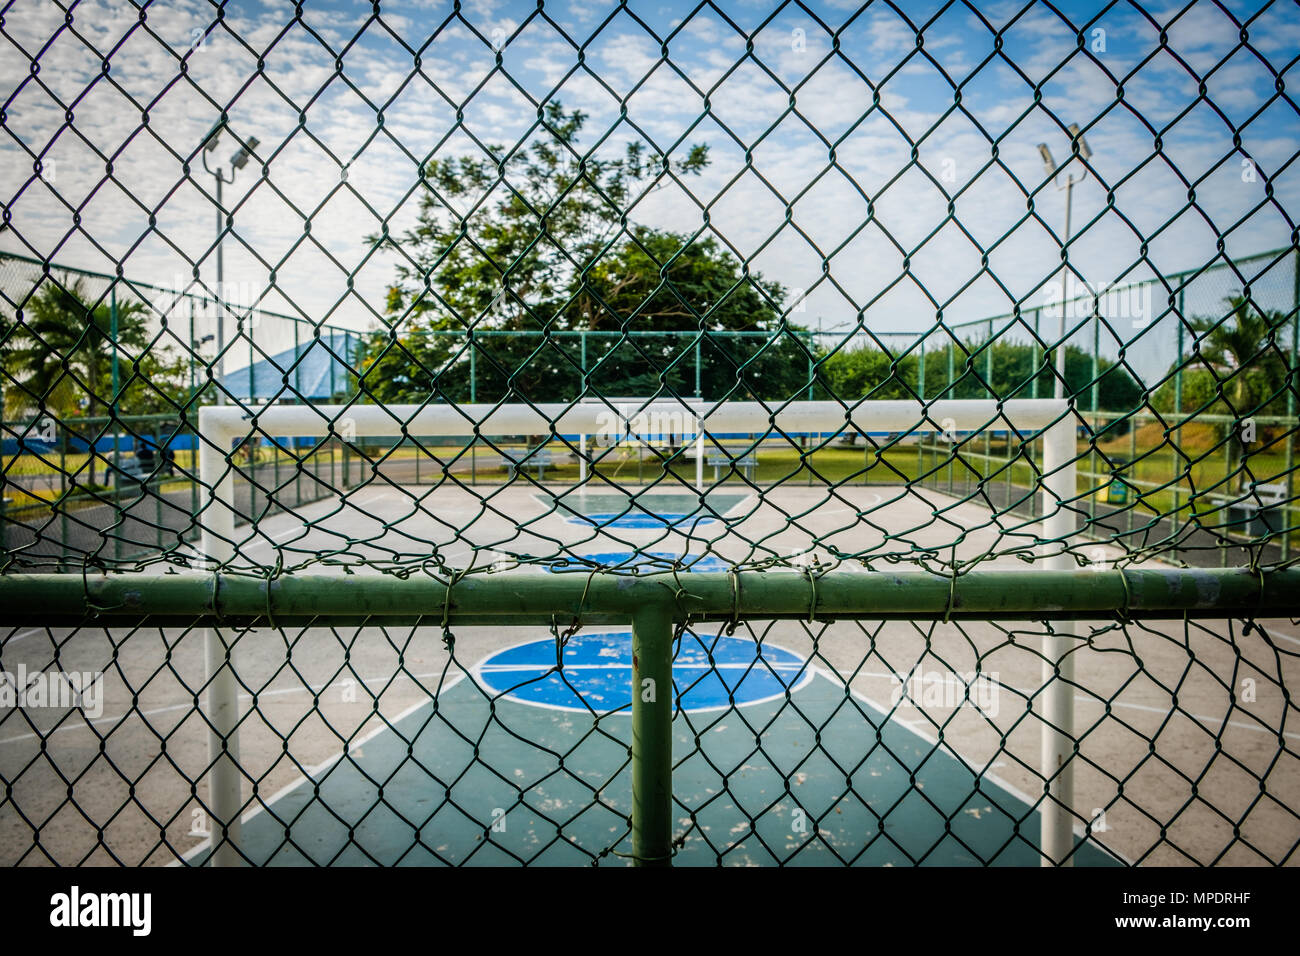 basketball court and soccer field in public park behind fence Stock Photo